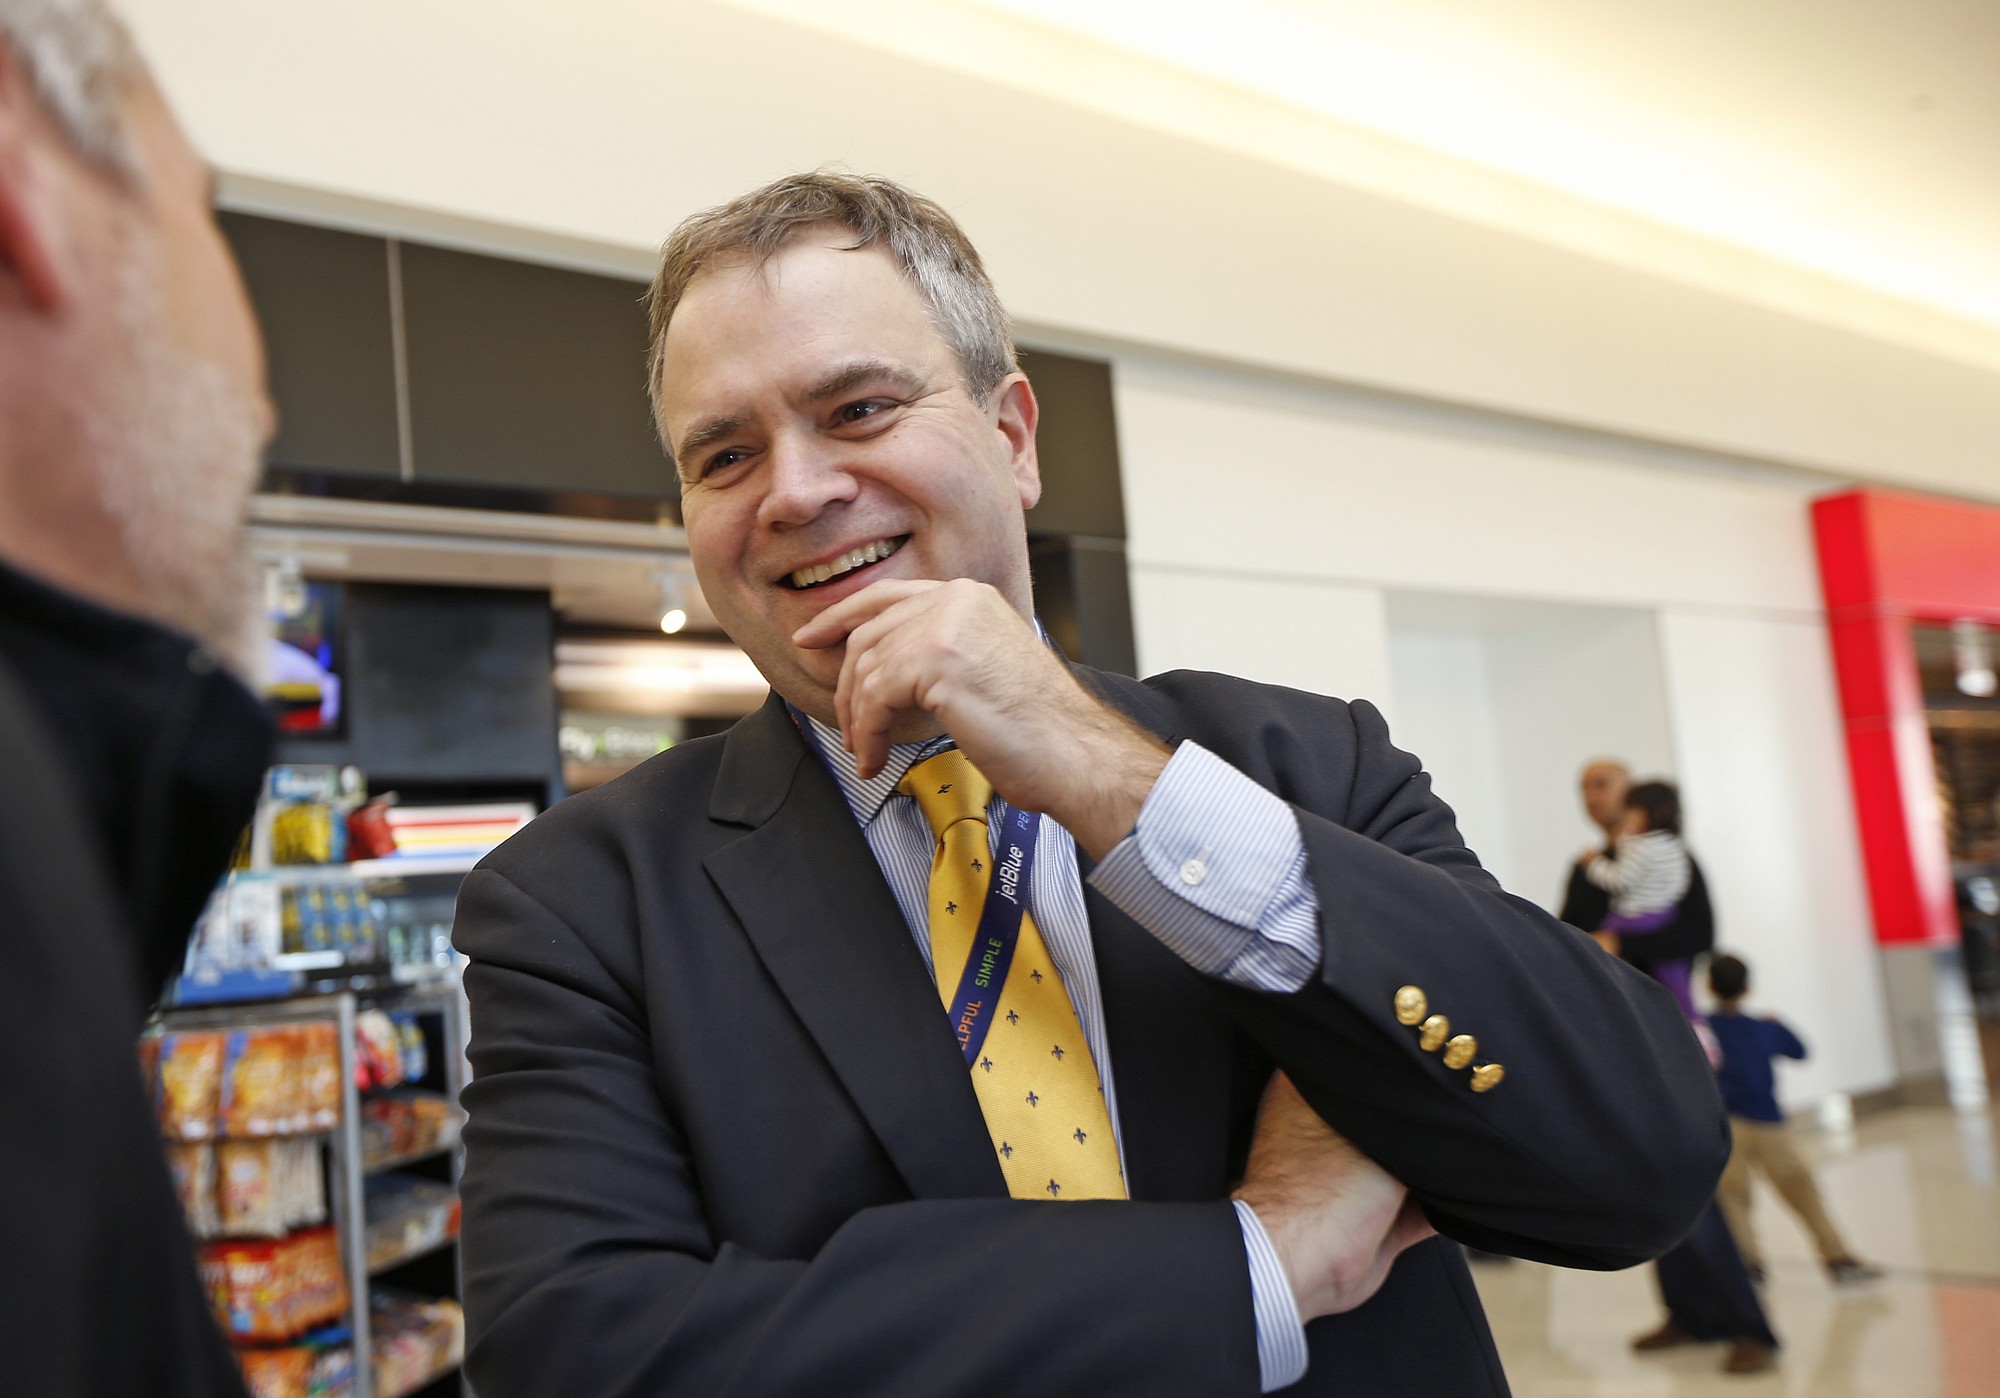 JetBlue's incoming CEO Robin Hayes talks to a departing airline passenger in the JetBlue terminal at John F.